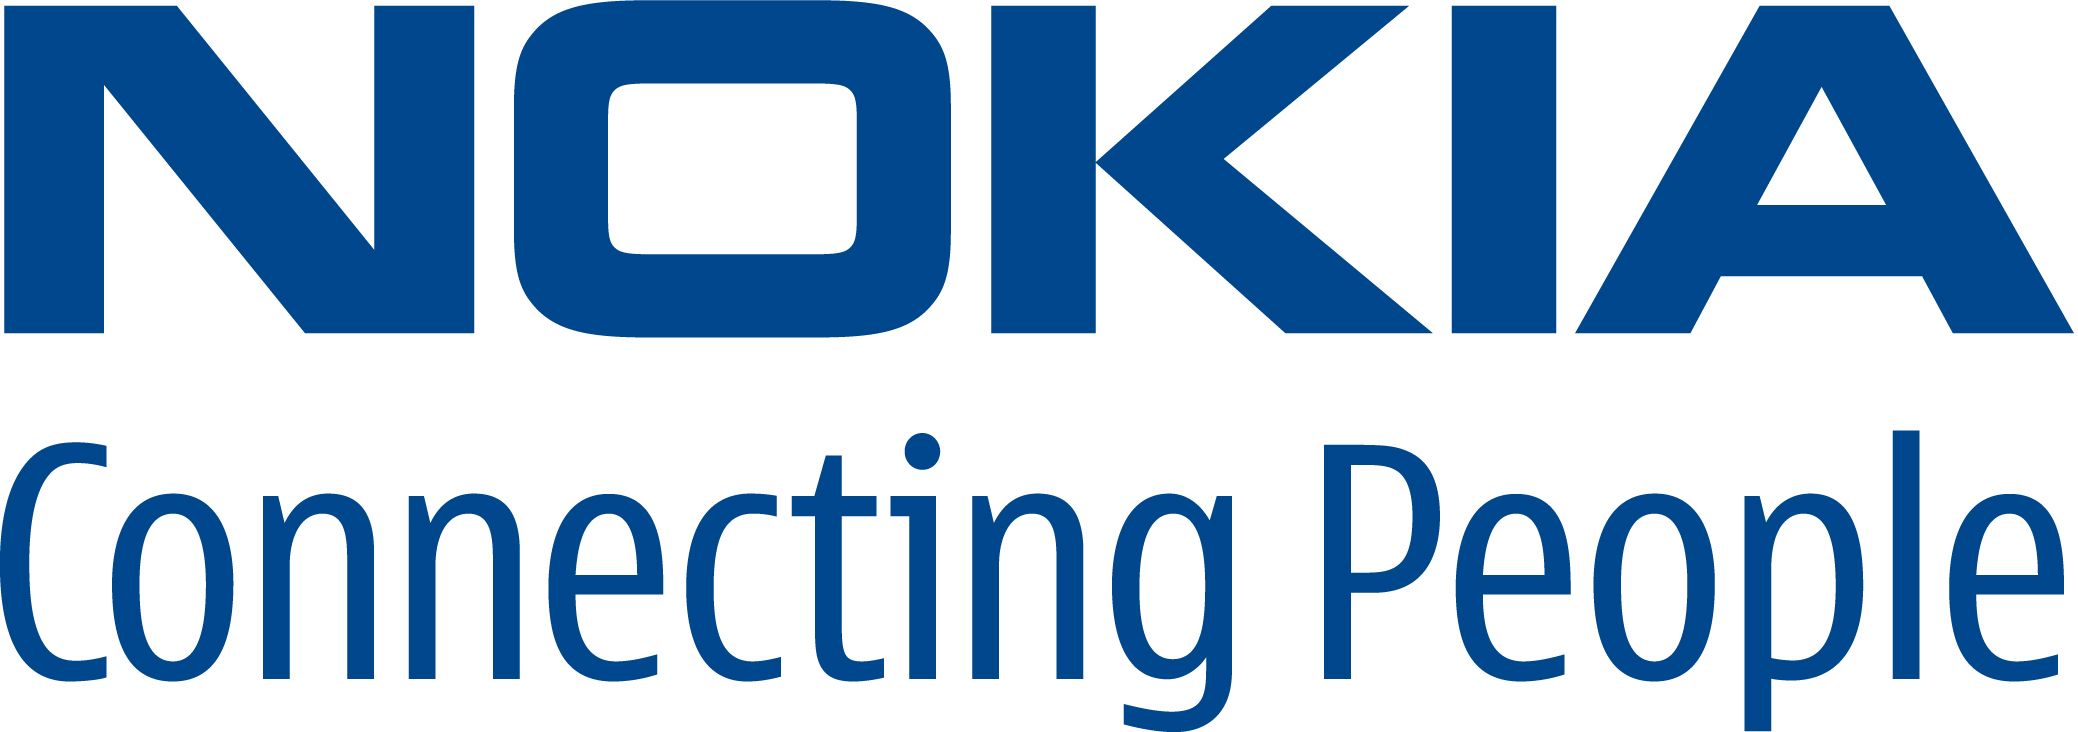 Nokia logo Download in HD Quality